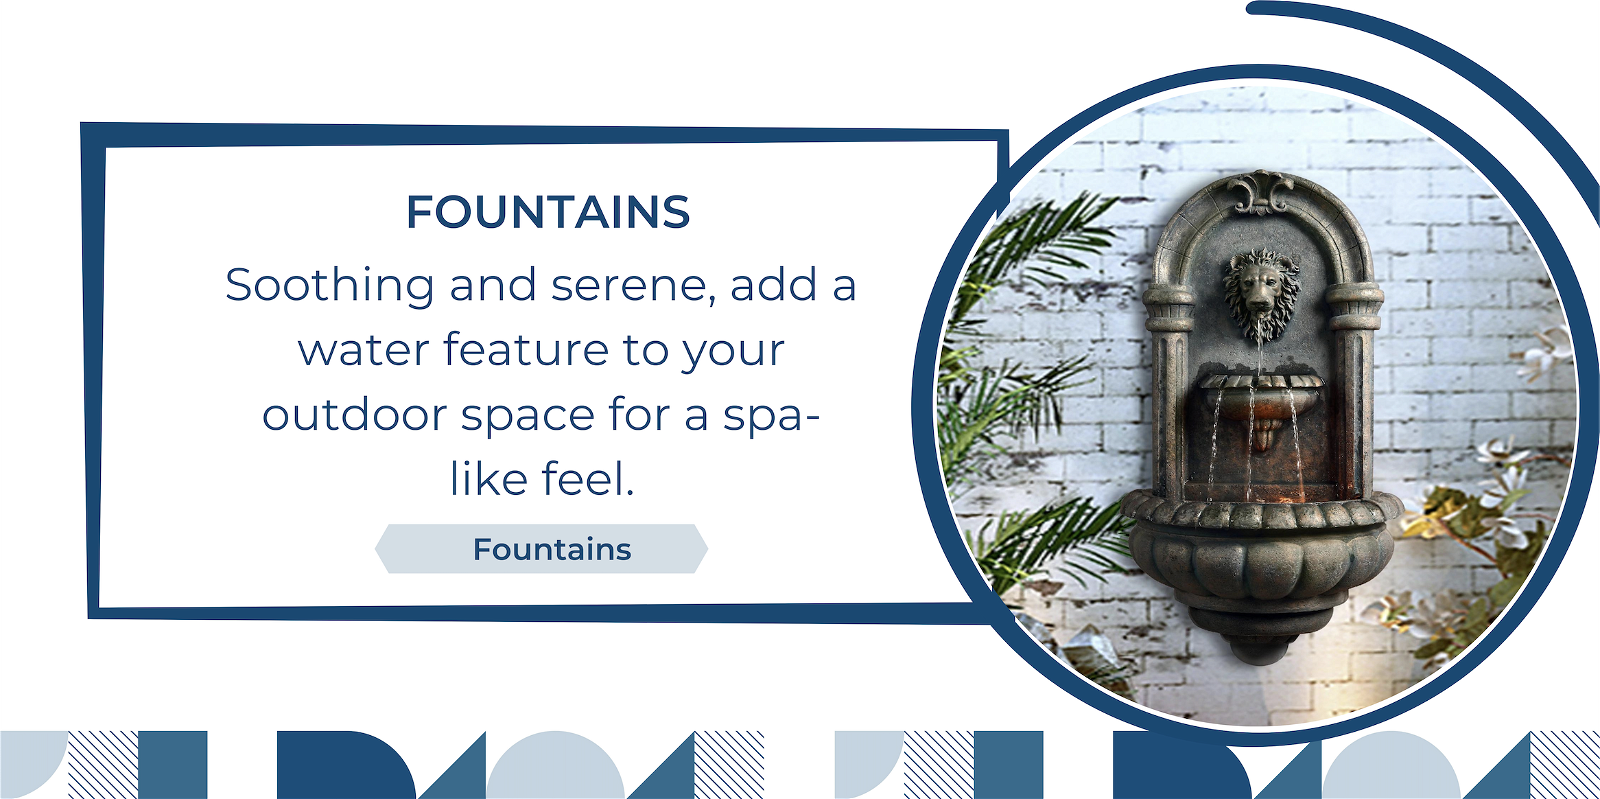 Fountains. Soothing and serene, add a water feature to your outdoor space for a spa-like feel. A three tiered lion wall fountain sits on a white brick wall.